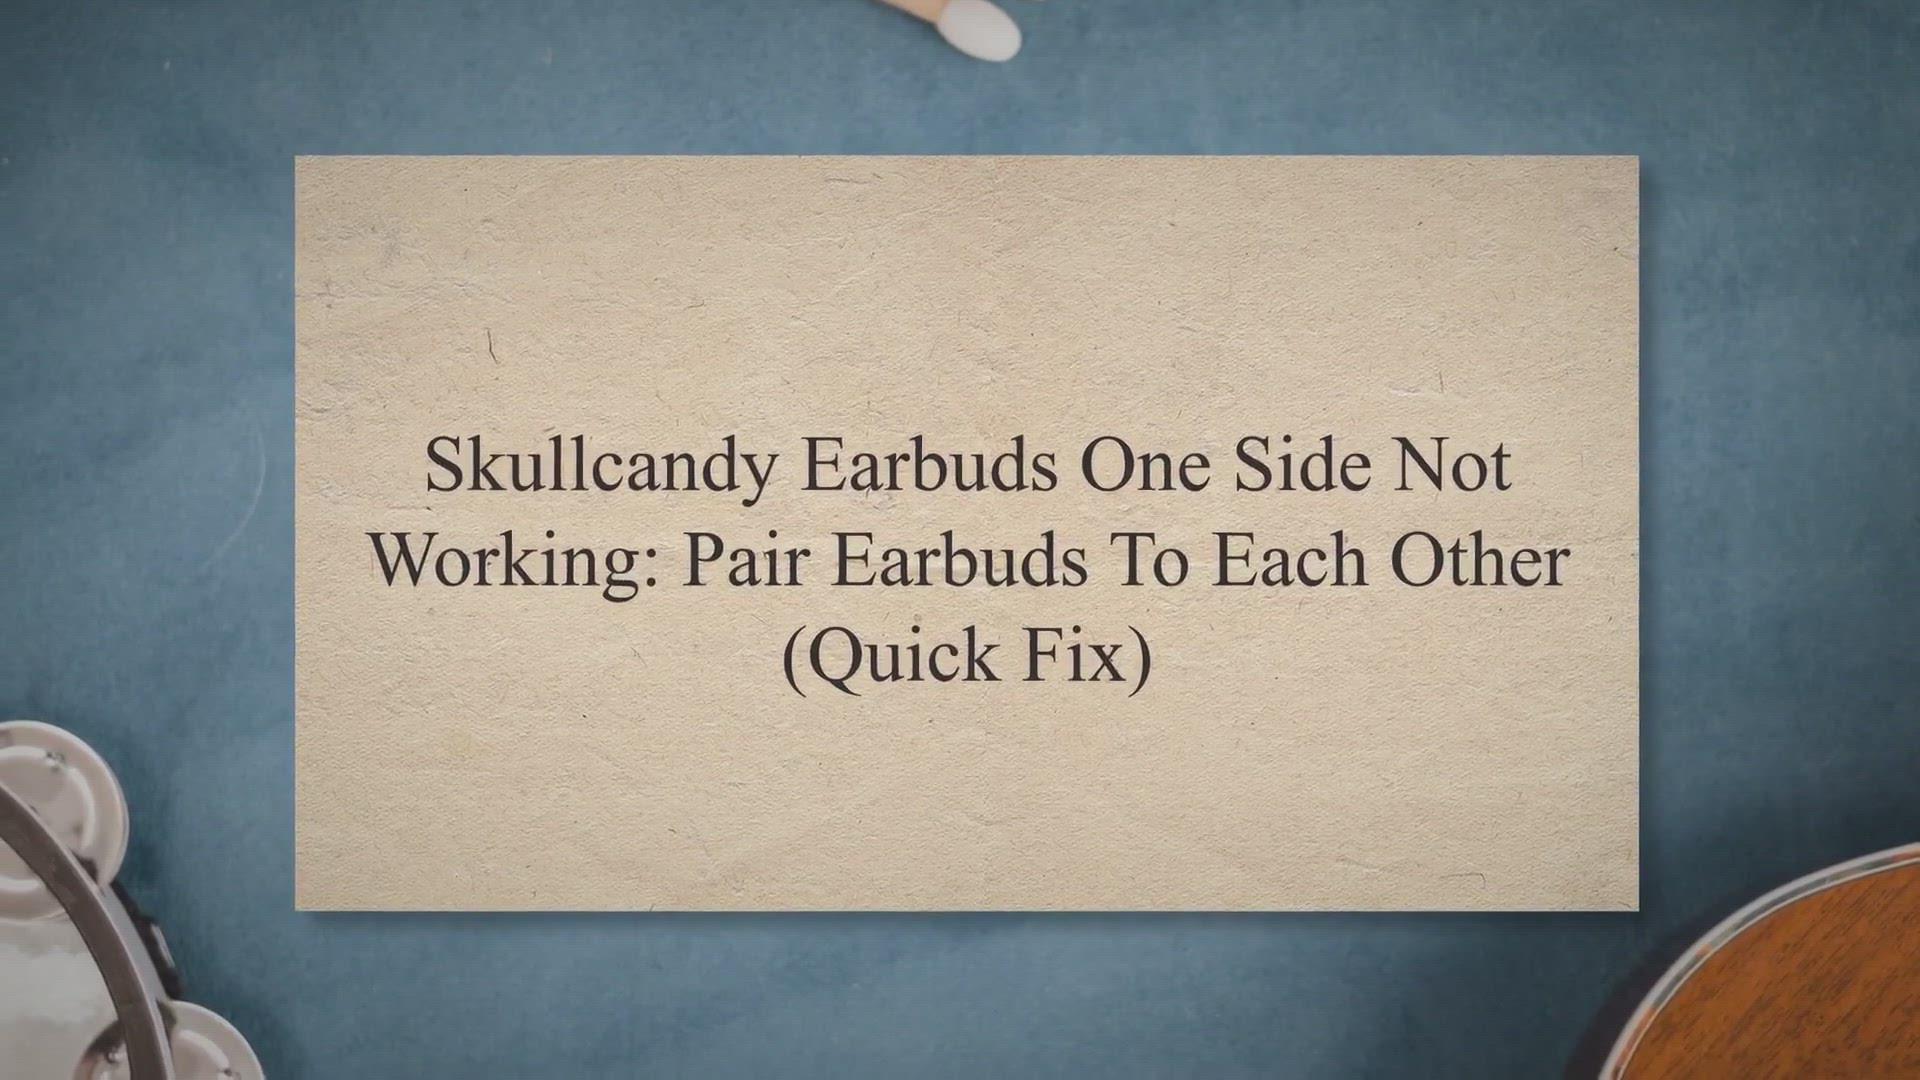 'Video thumbnail for Skullcandy Earbuds One Side Not Working: Pair Earbuds To Each Other (Quick Fix)'